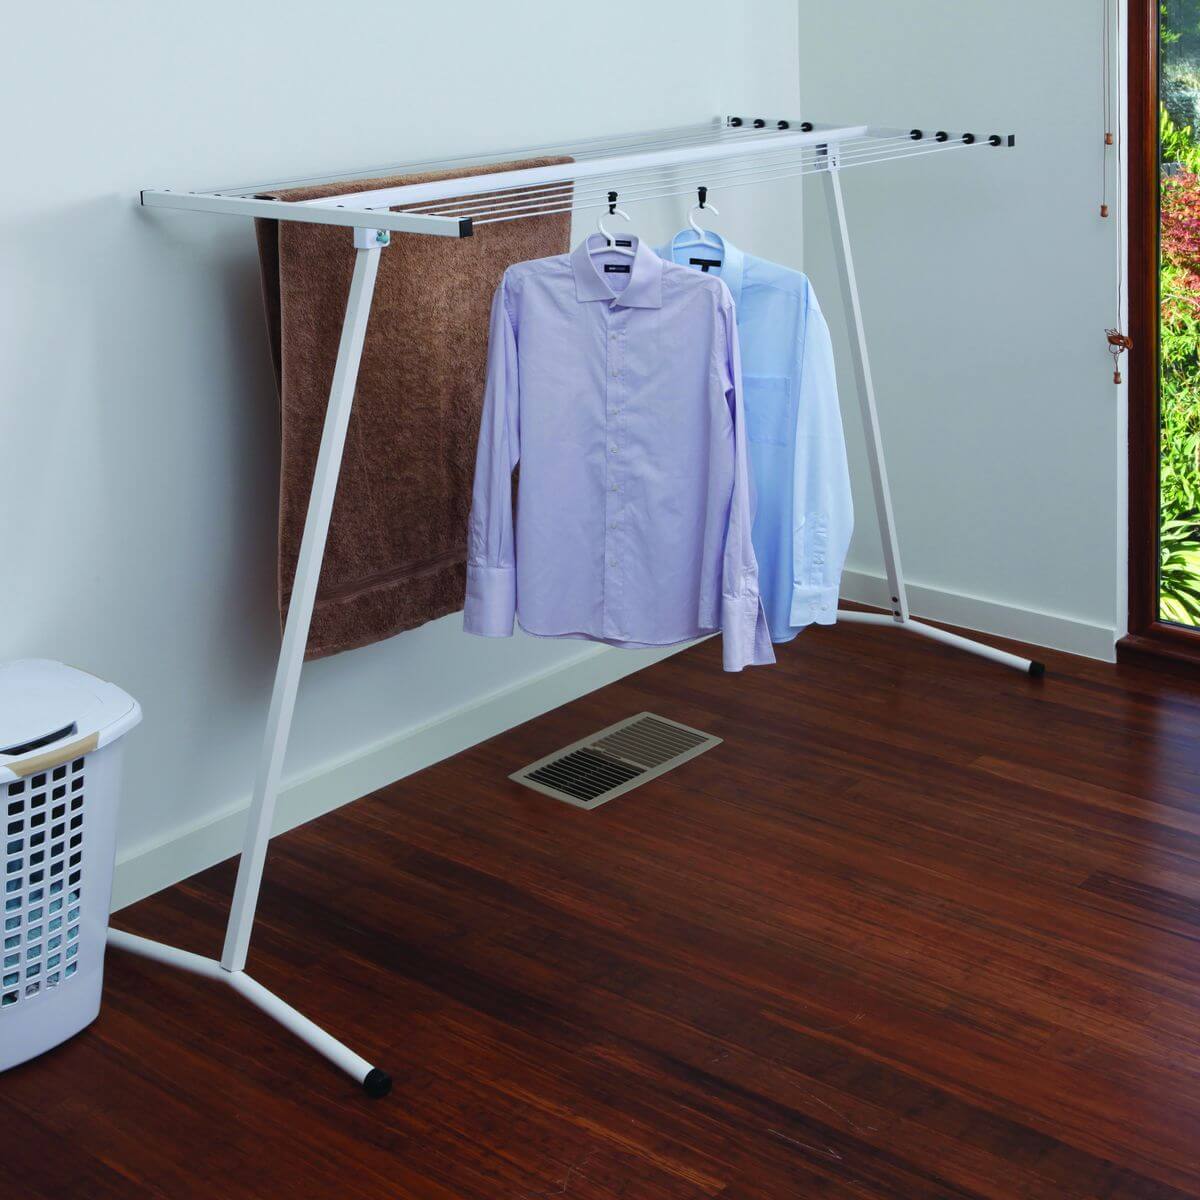 A large white freestanding clothesline used indoors to hang laundry